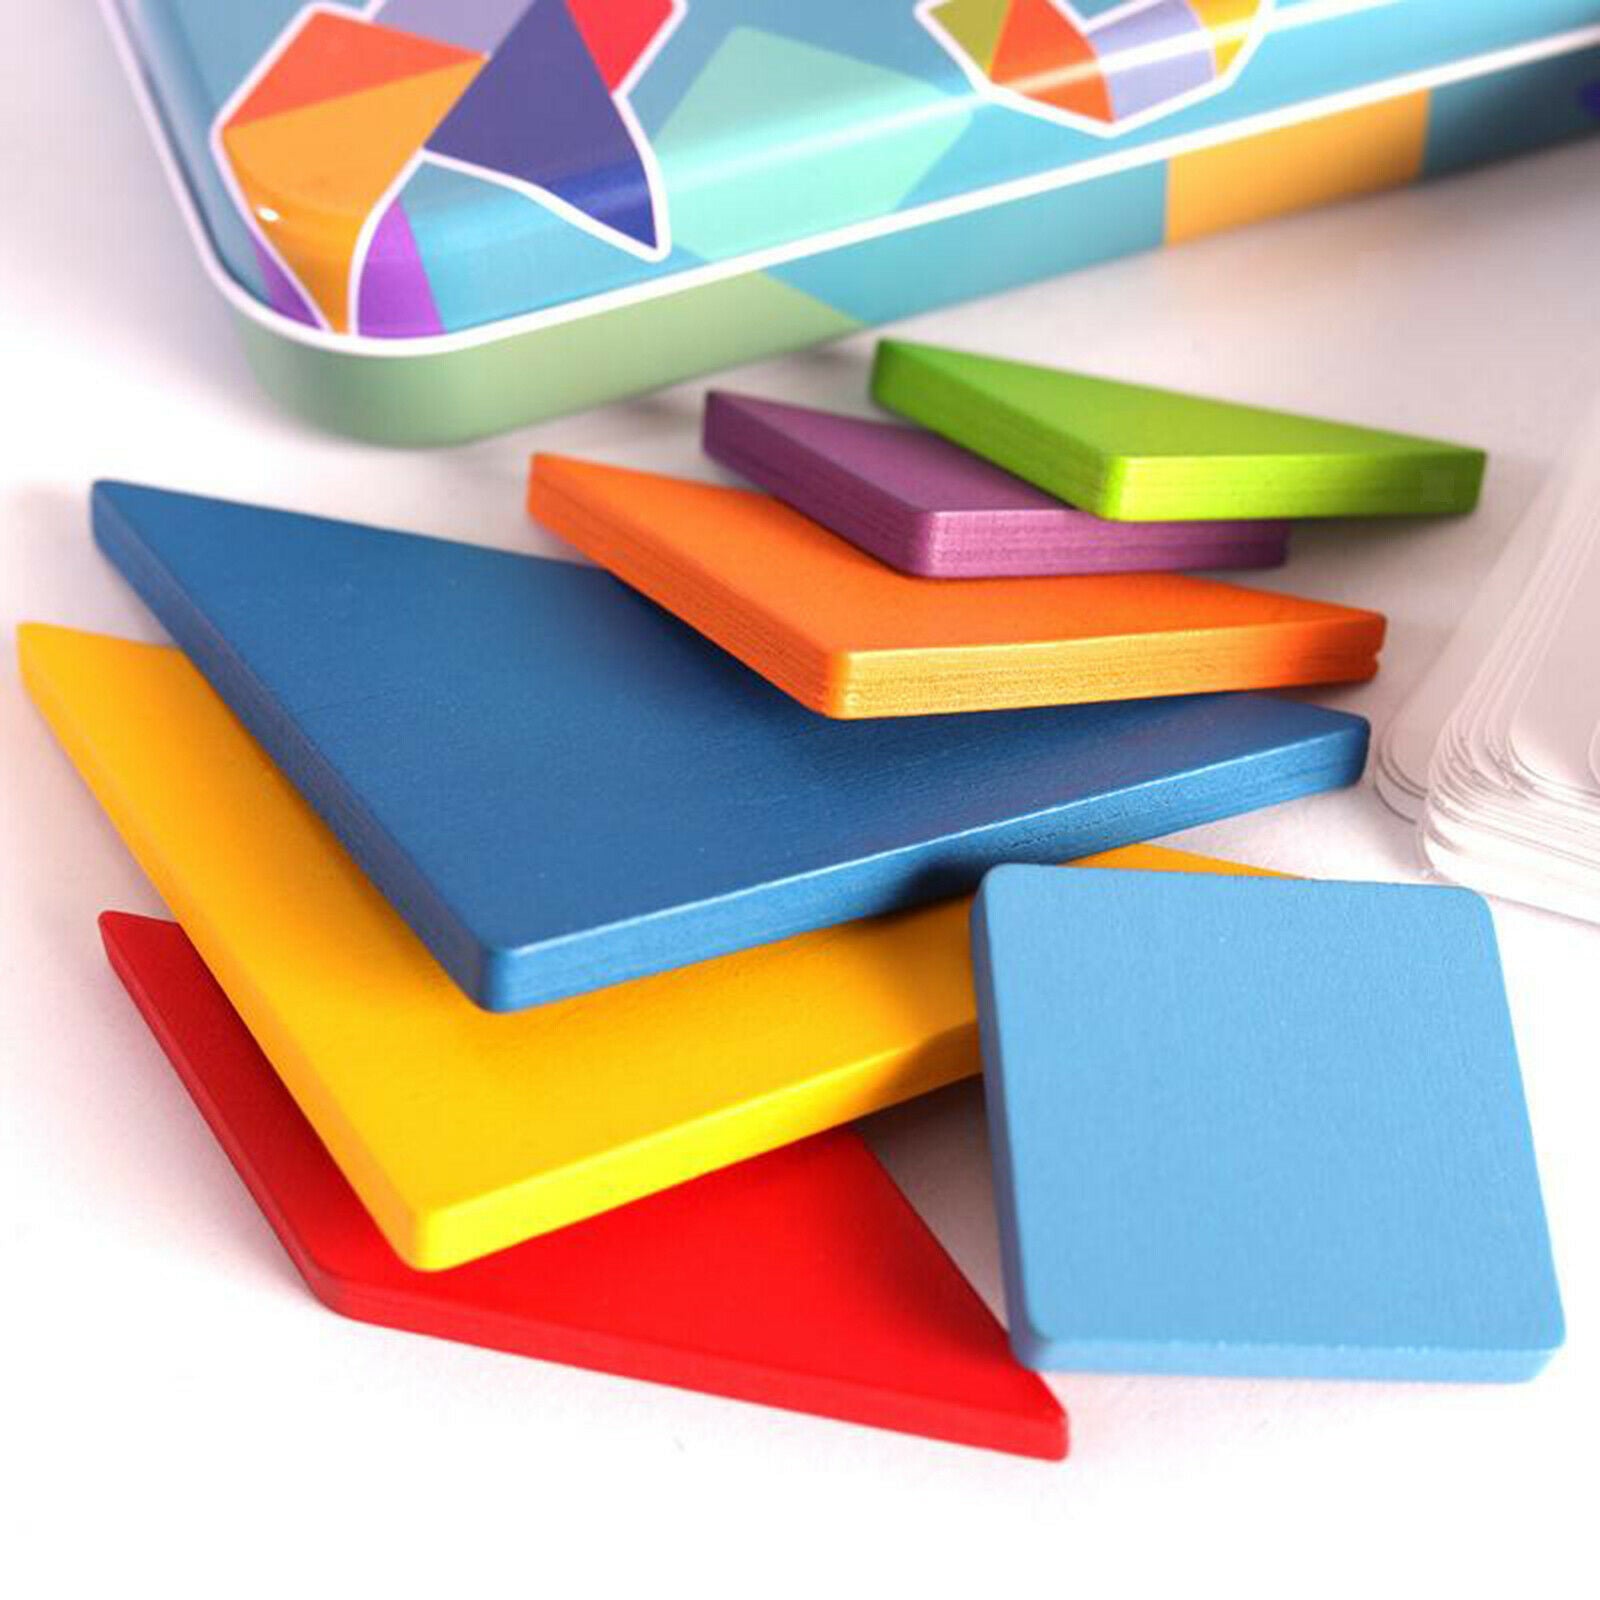 Wooden Pattern Blocks Jigsaw Puzzle Sorting and Stacking Games Montessori